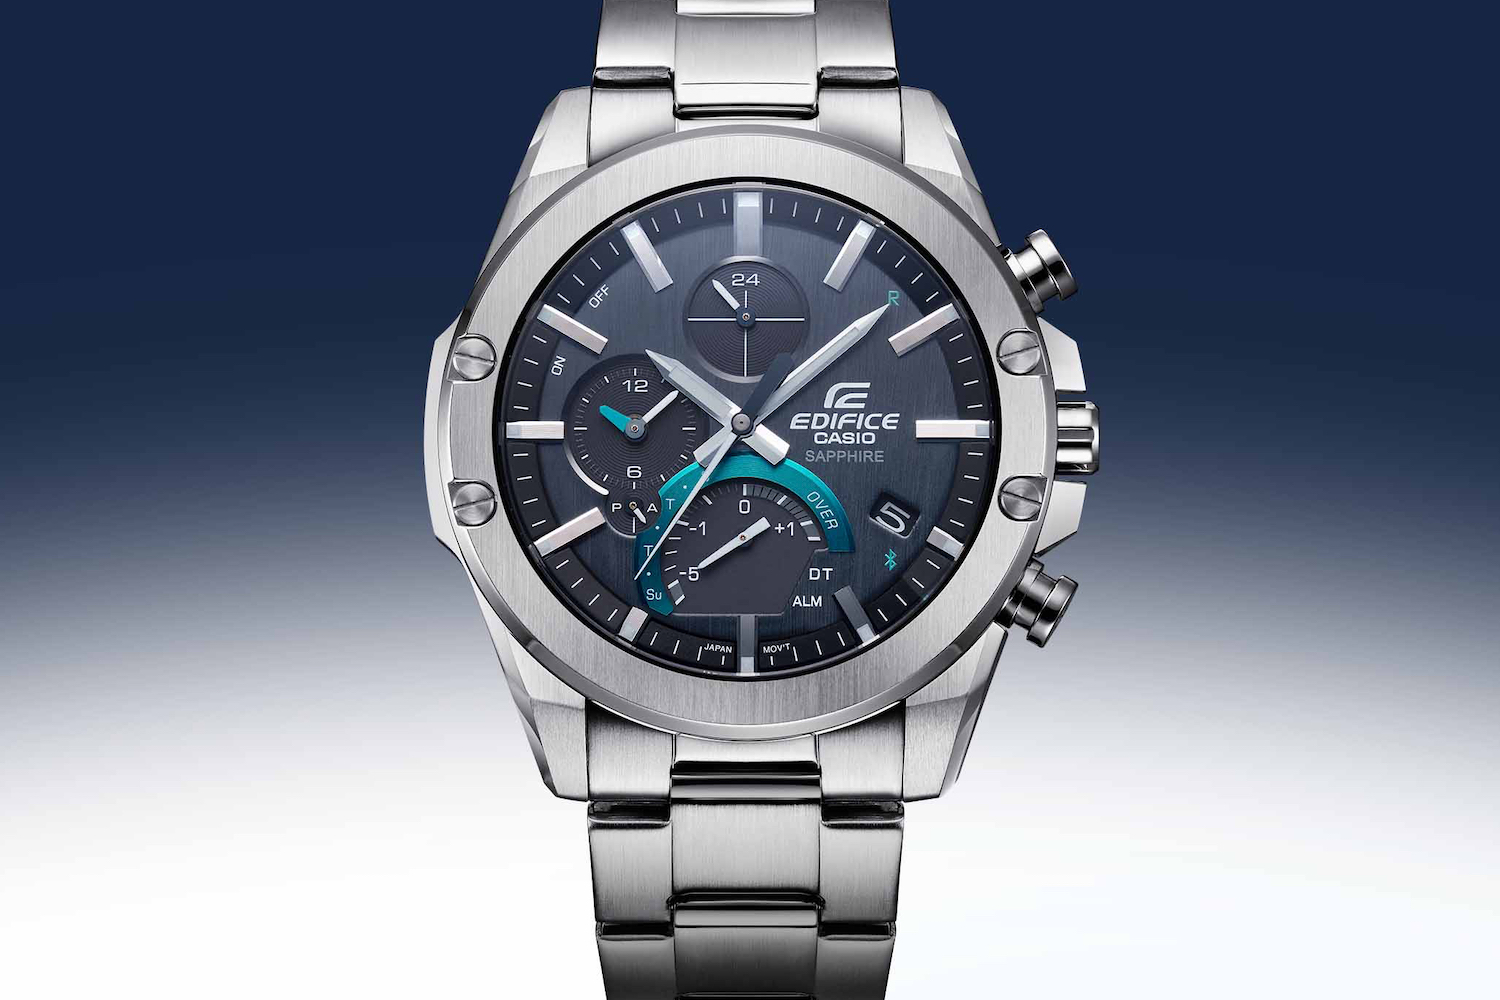 Casio Slims Down Sporty Edifice Watch, Adds Desirable Connected